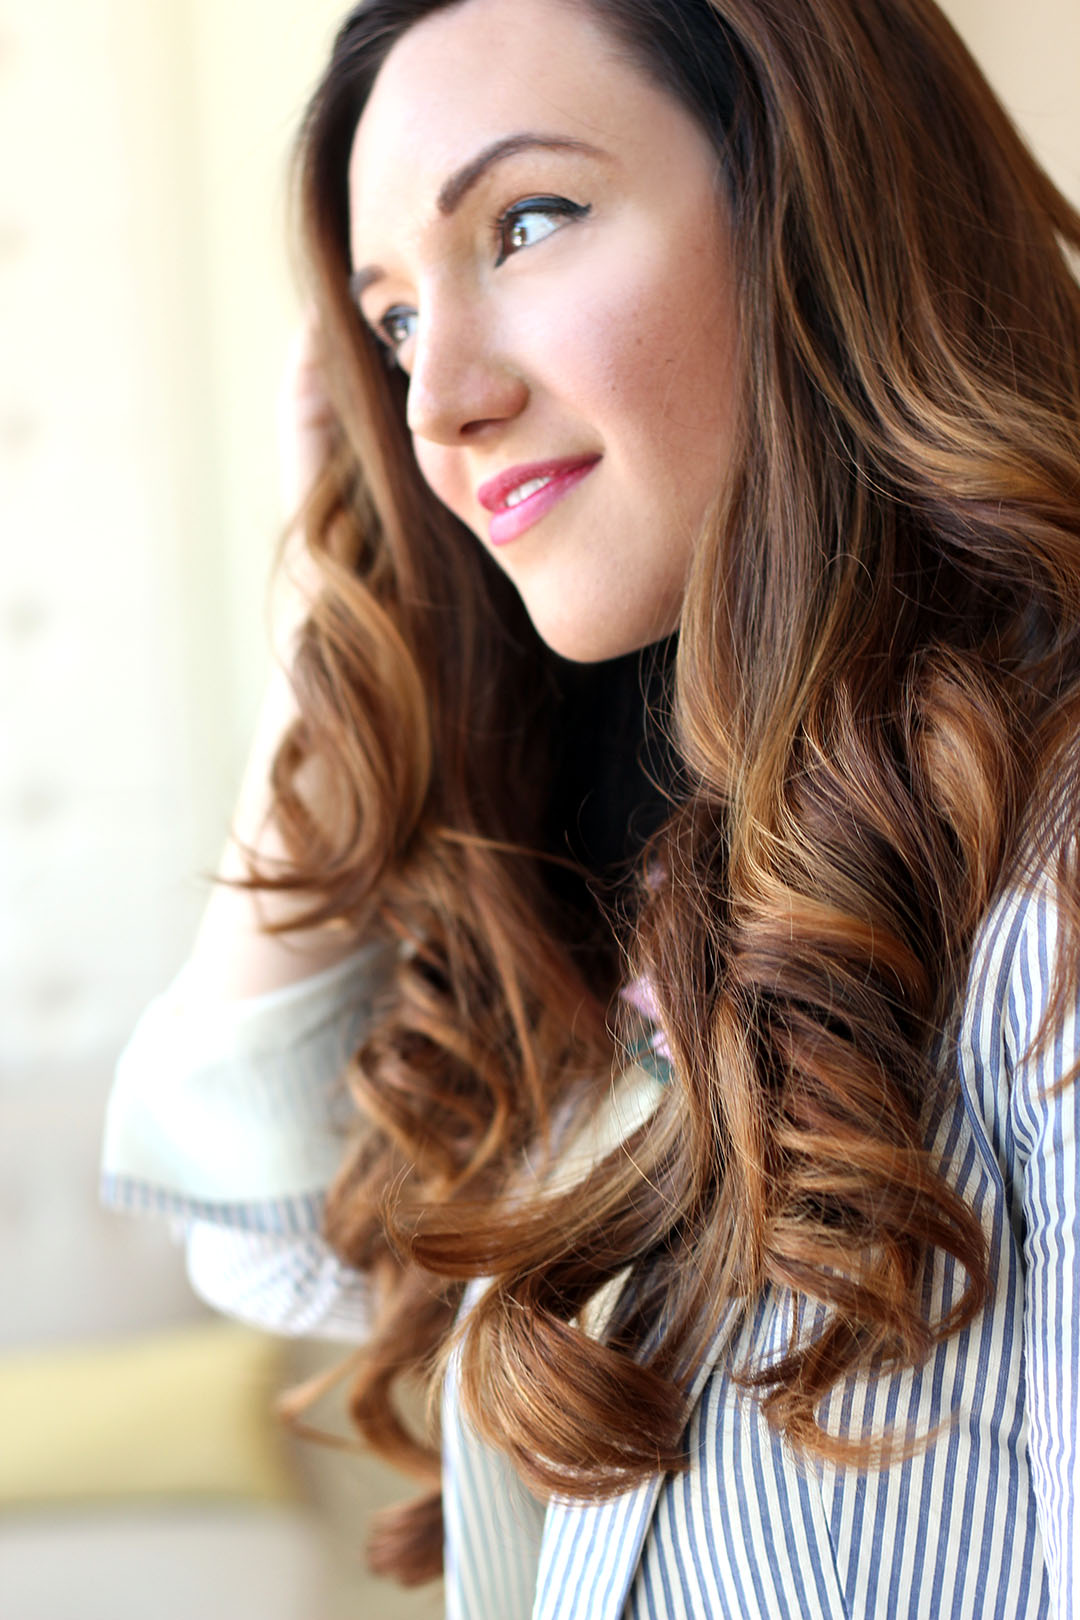 Cosmo Tai Drybar featured by top San Francisco beauty blog, Just Add Glam